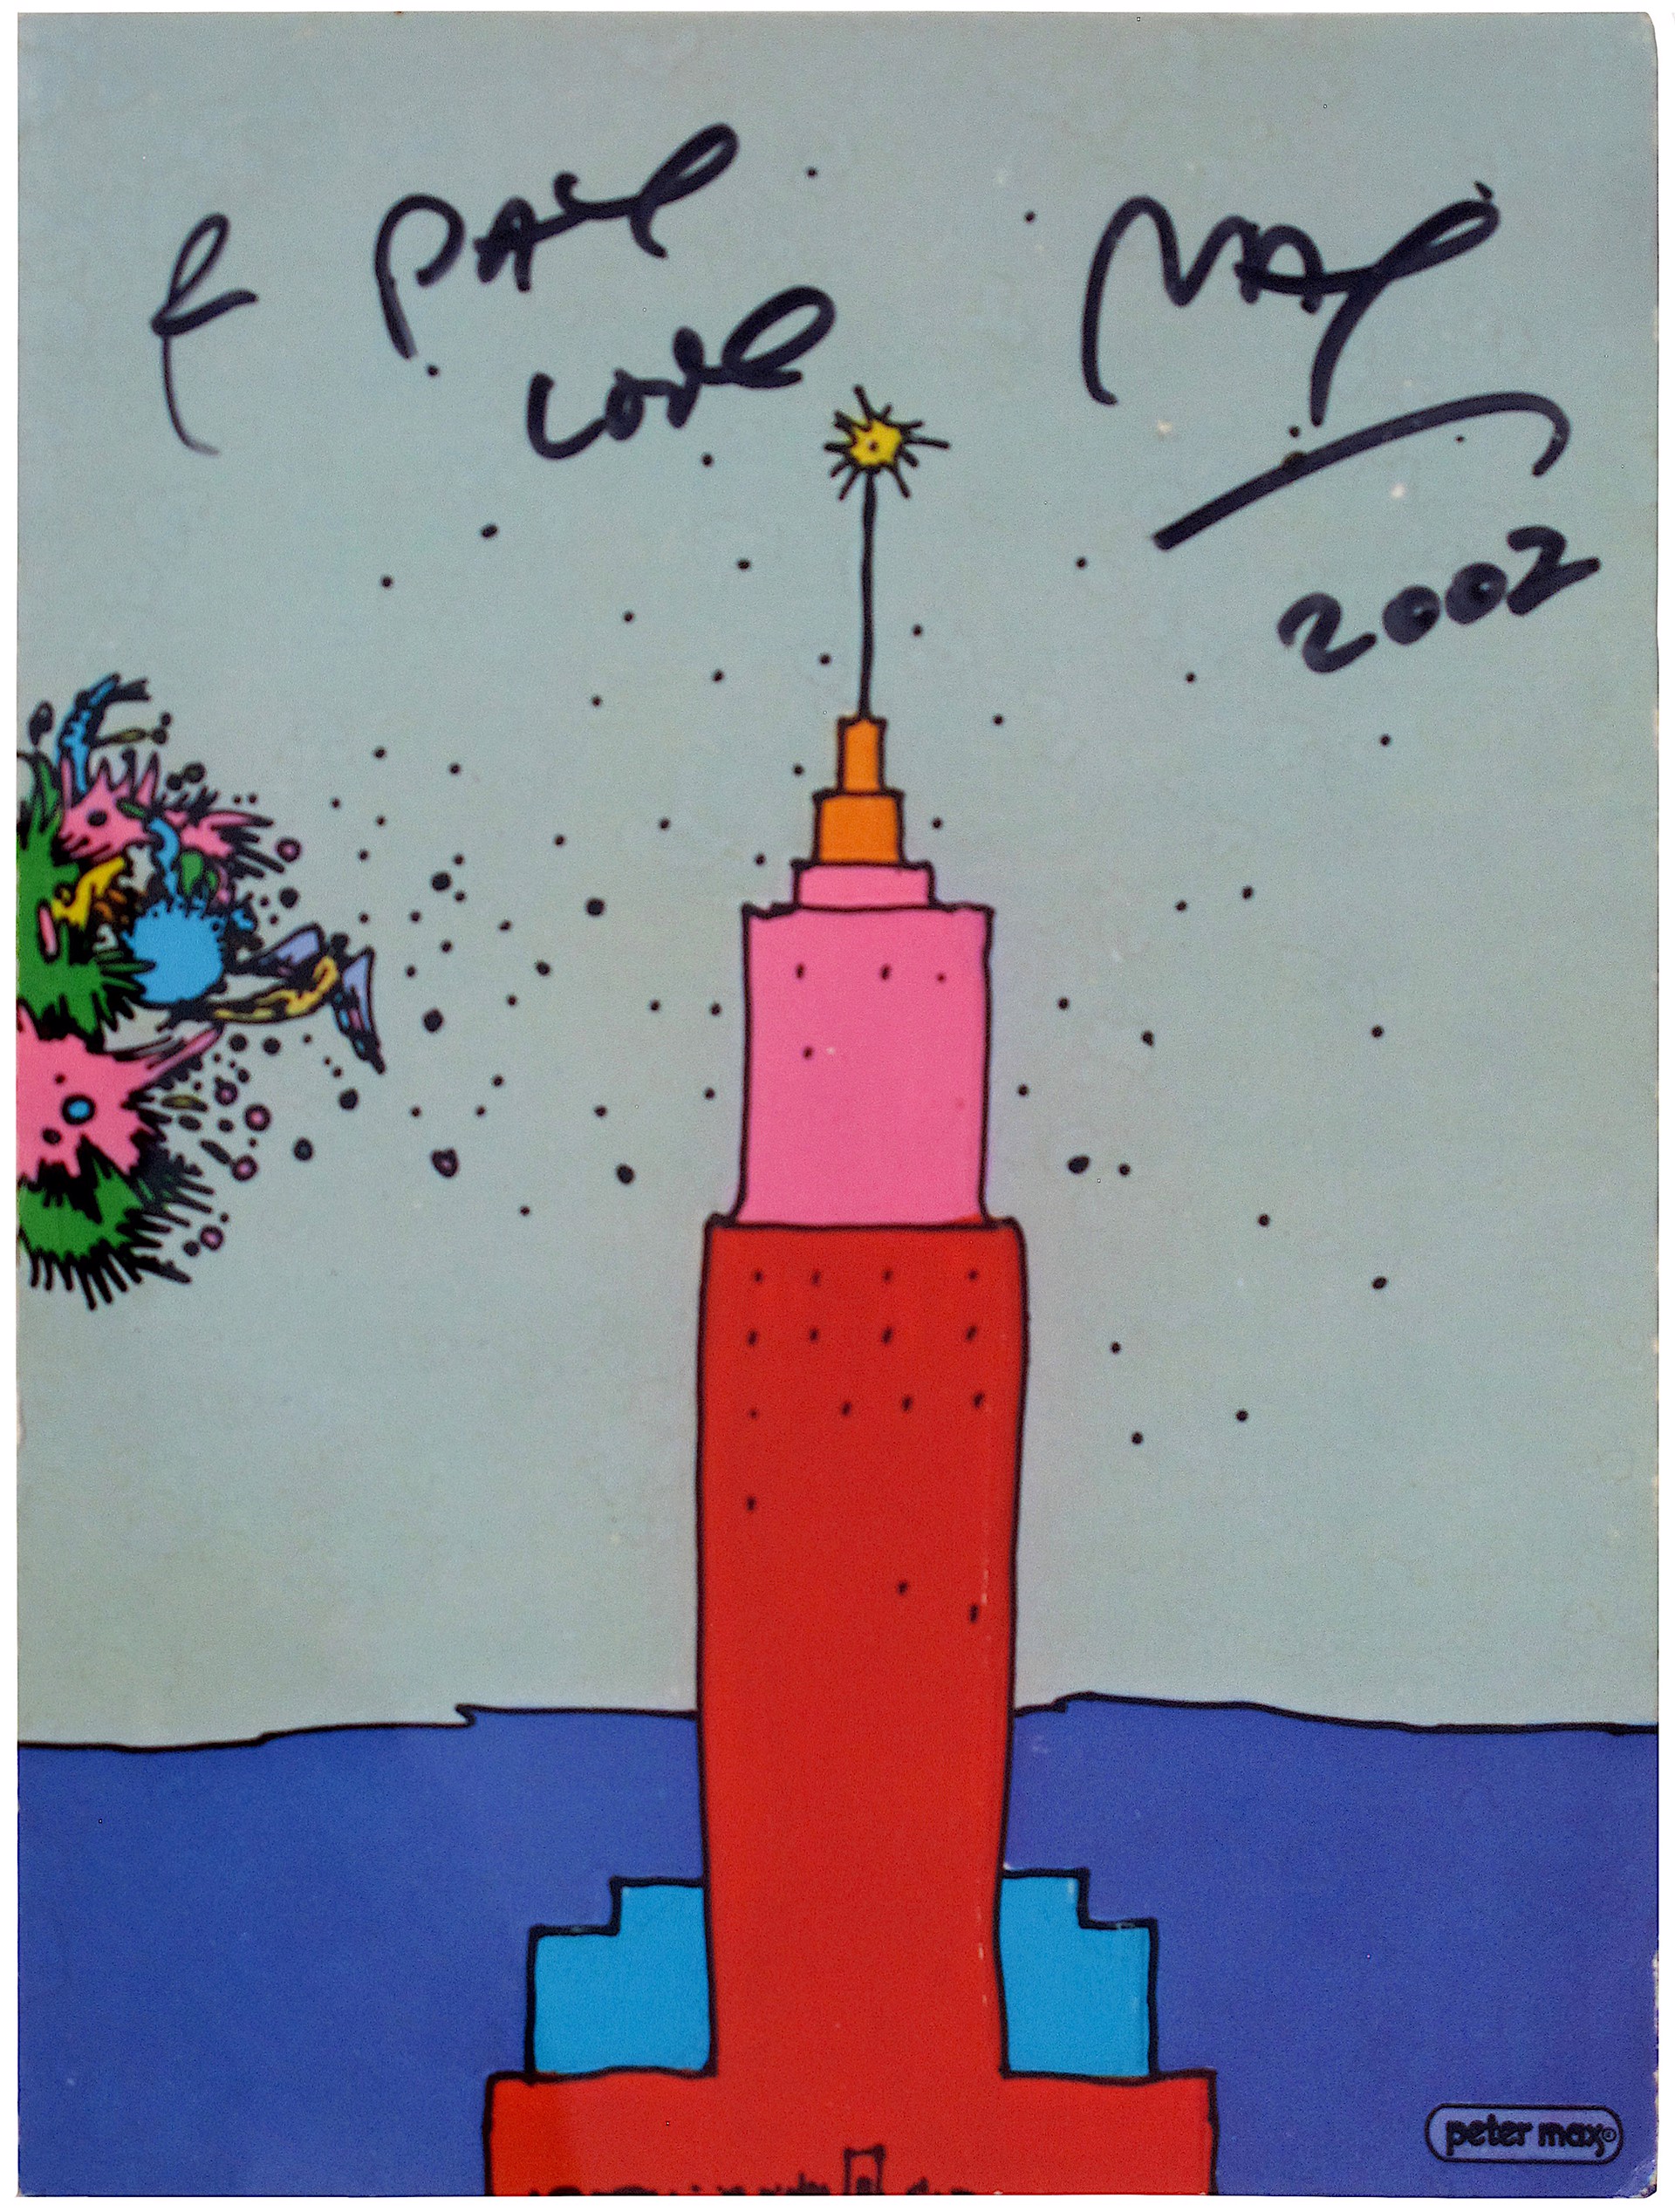 Empire State Building NYC by Peter Max